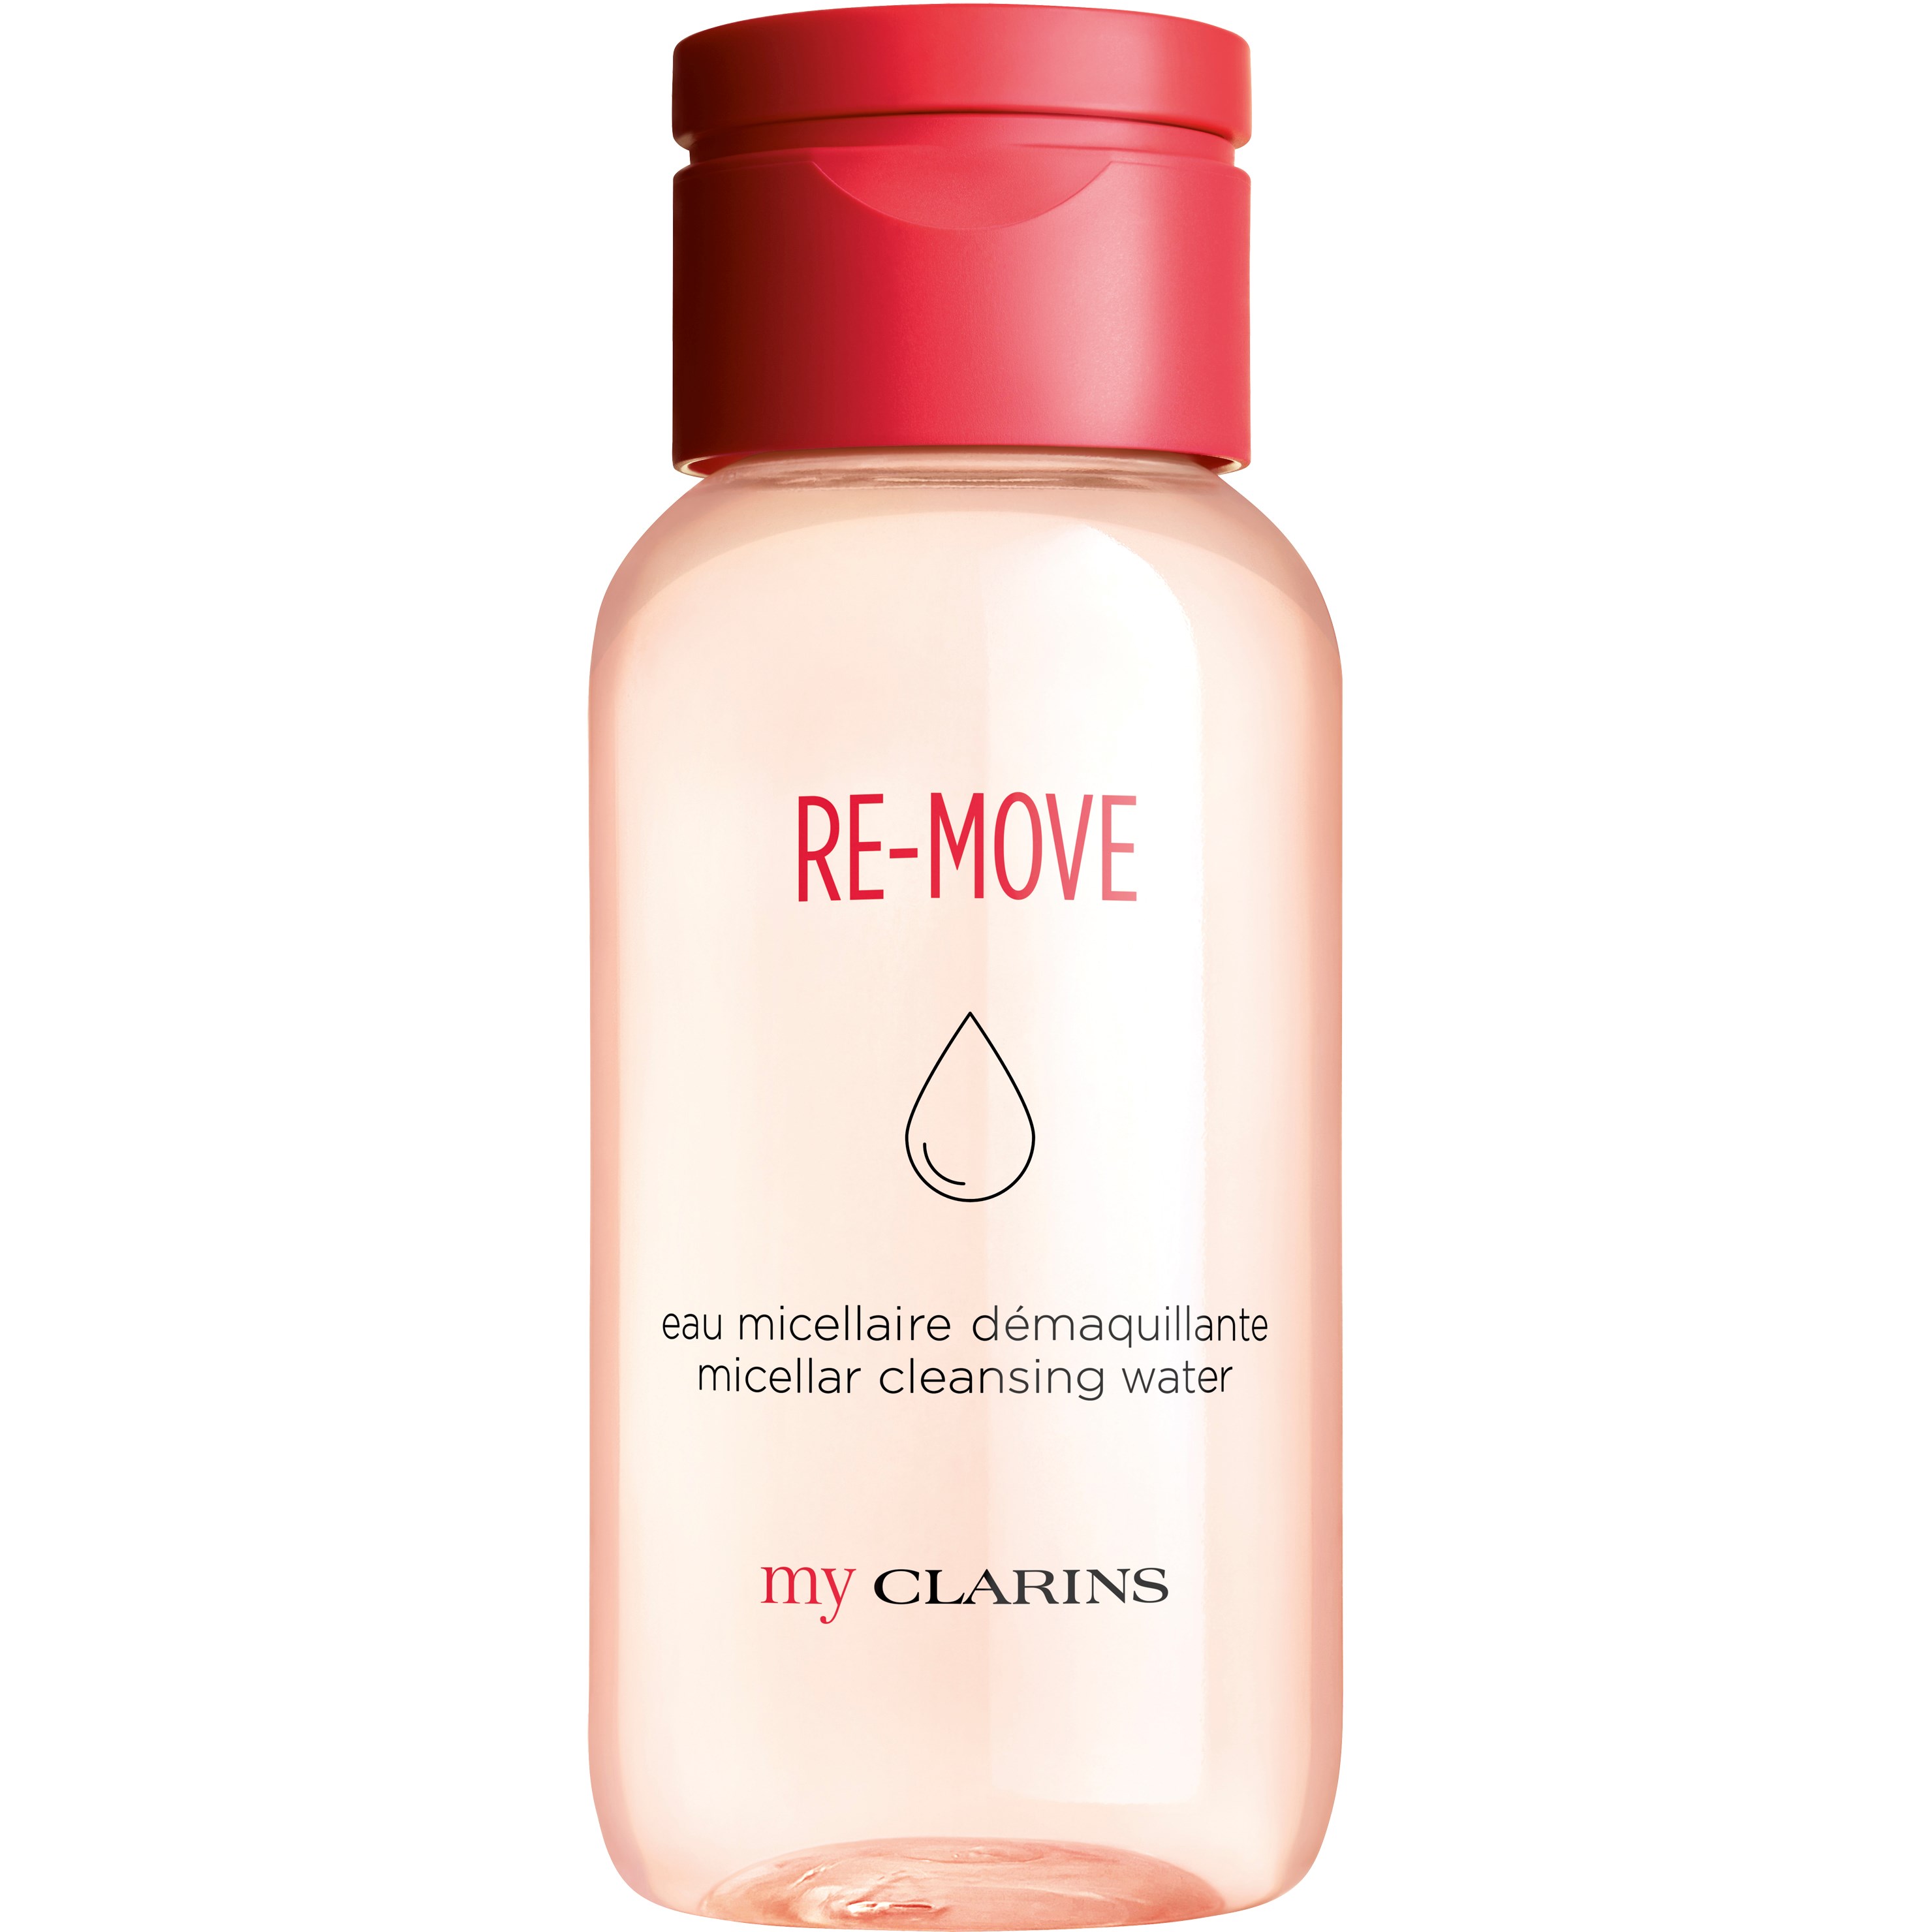 Clarins Re-Move My Clarins Micellar Cleansing Water